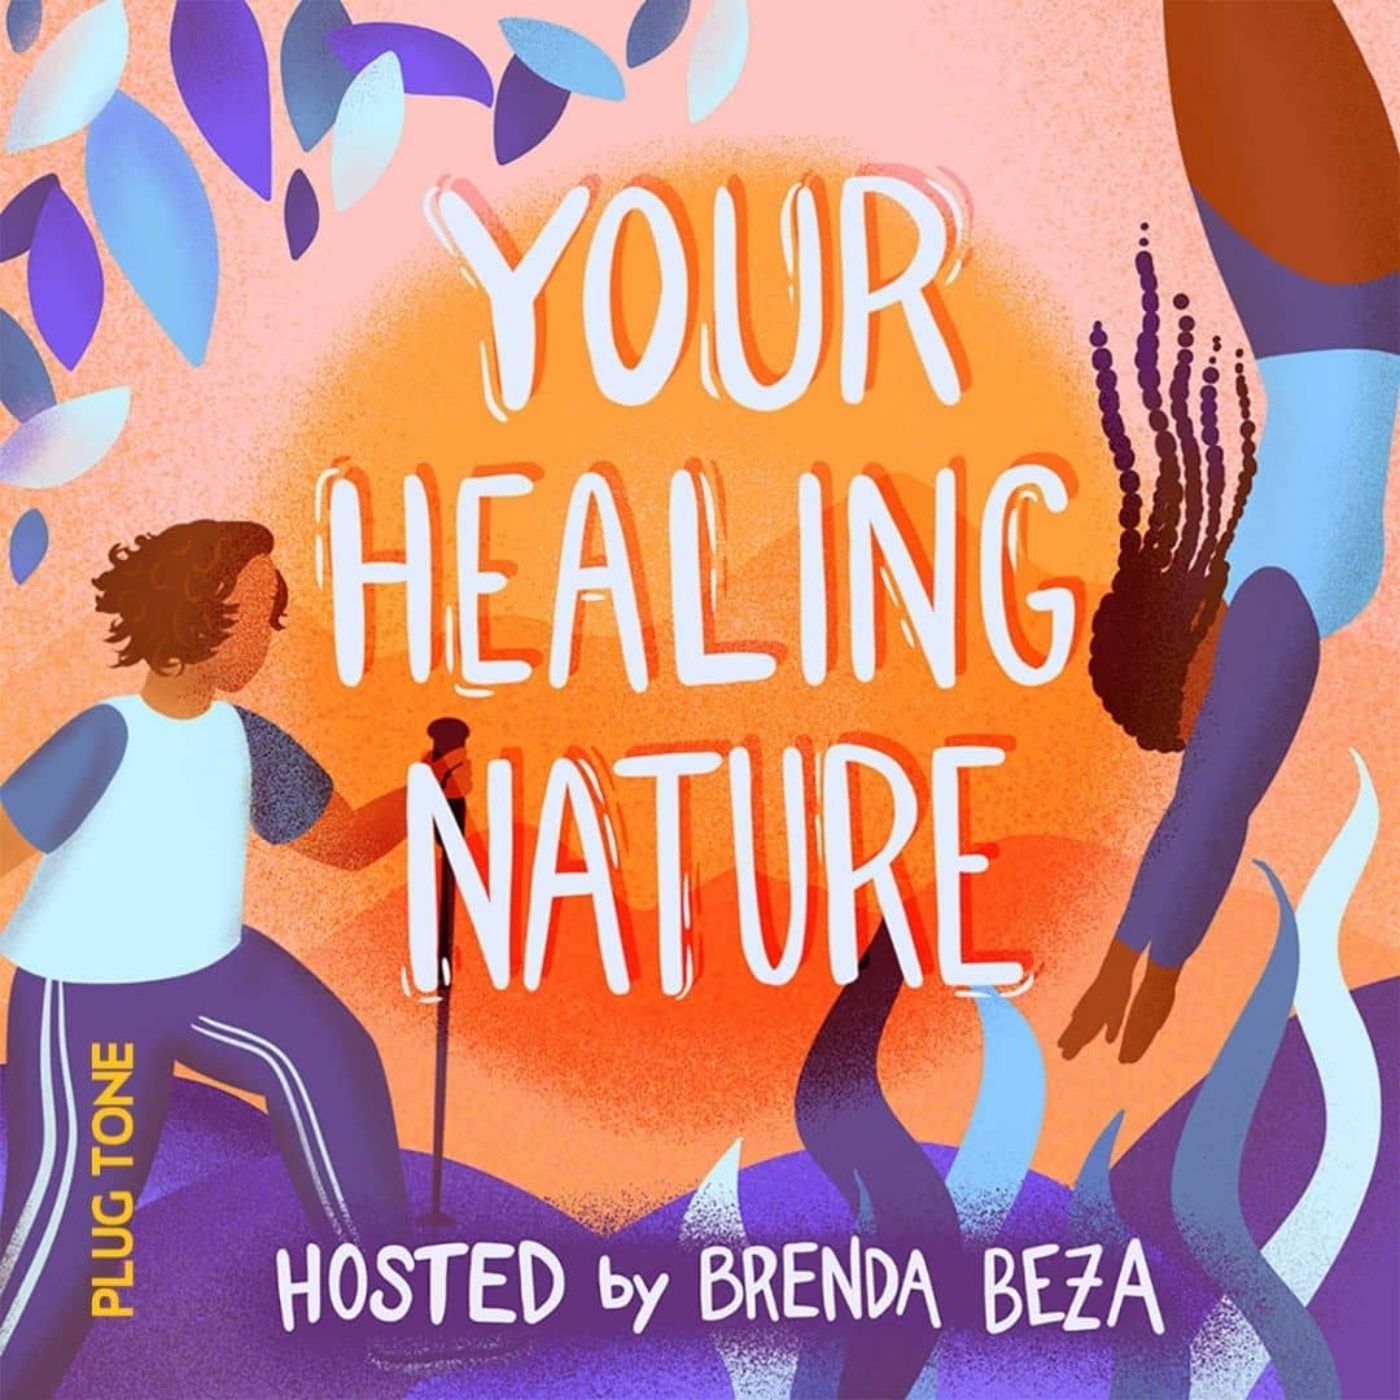 Artwork for Your Healing Nature